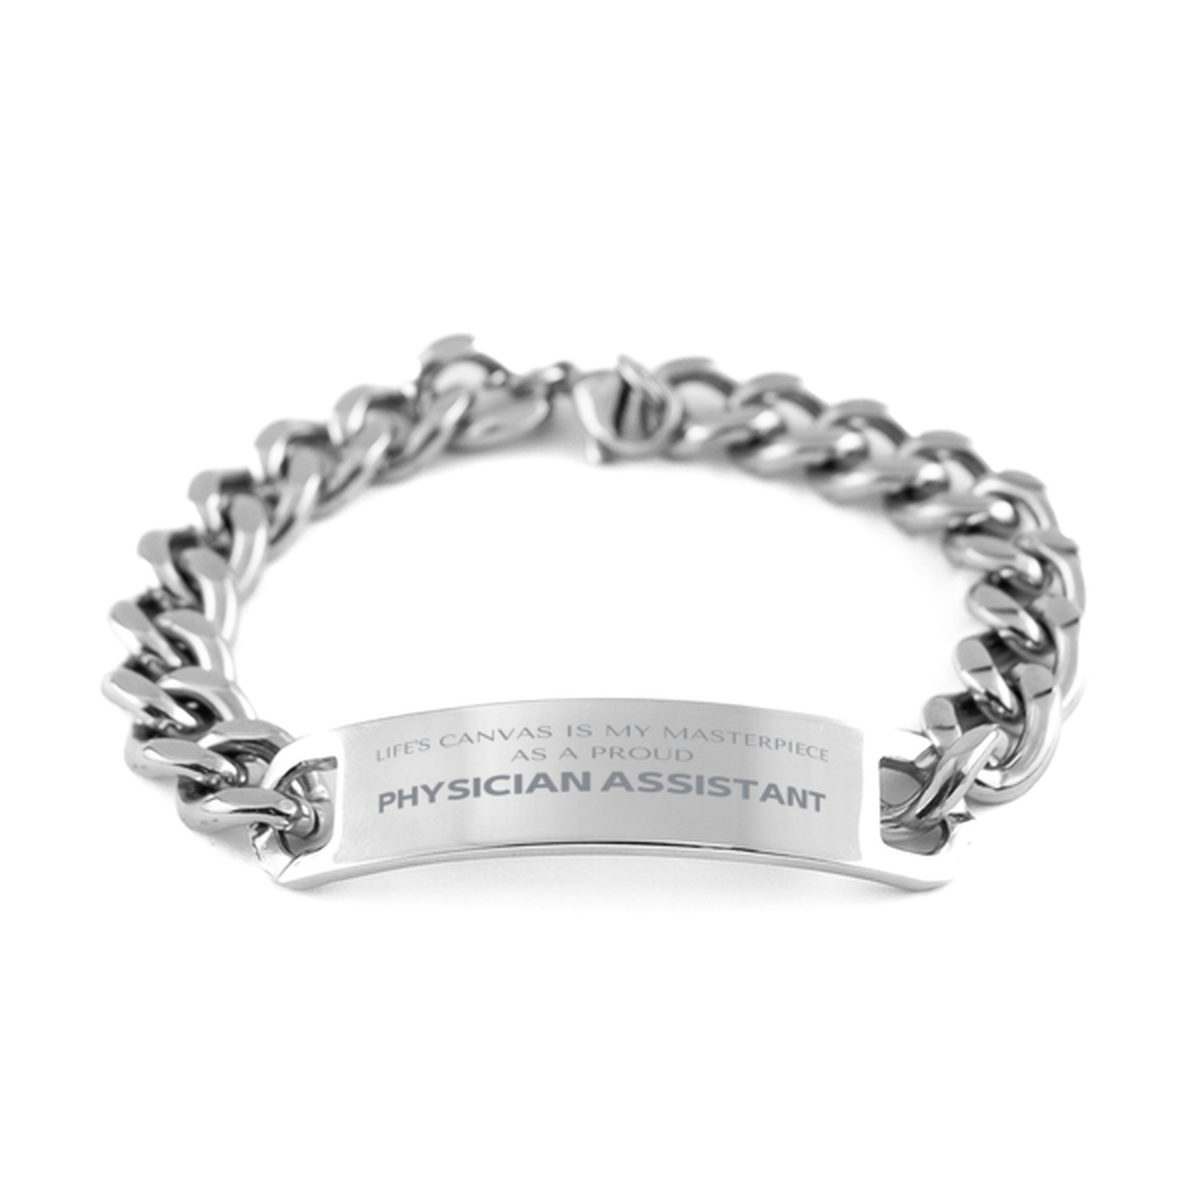 Proud Physician Assistant Gifts, Life's canvas is my masterpiece, Epic Birthday Christmas Unique Cuban Chain Stainless Steel Bracelet For Physician Assistant, Coworkers, Men, Women, Friends